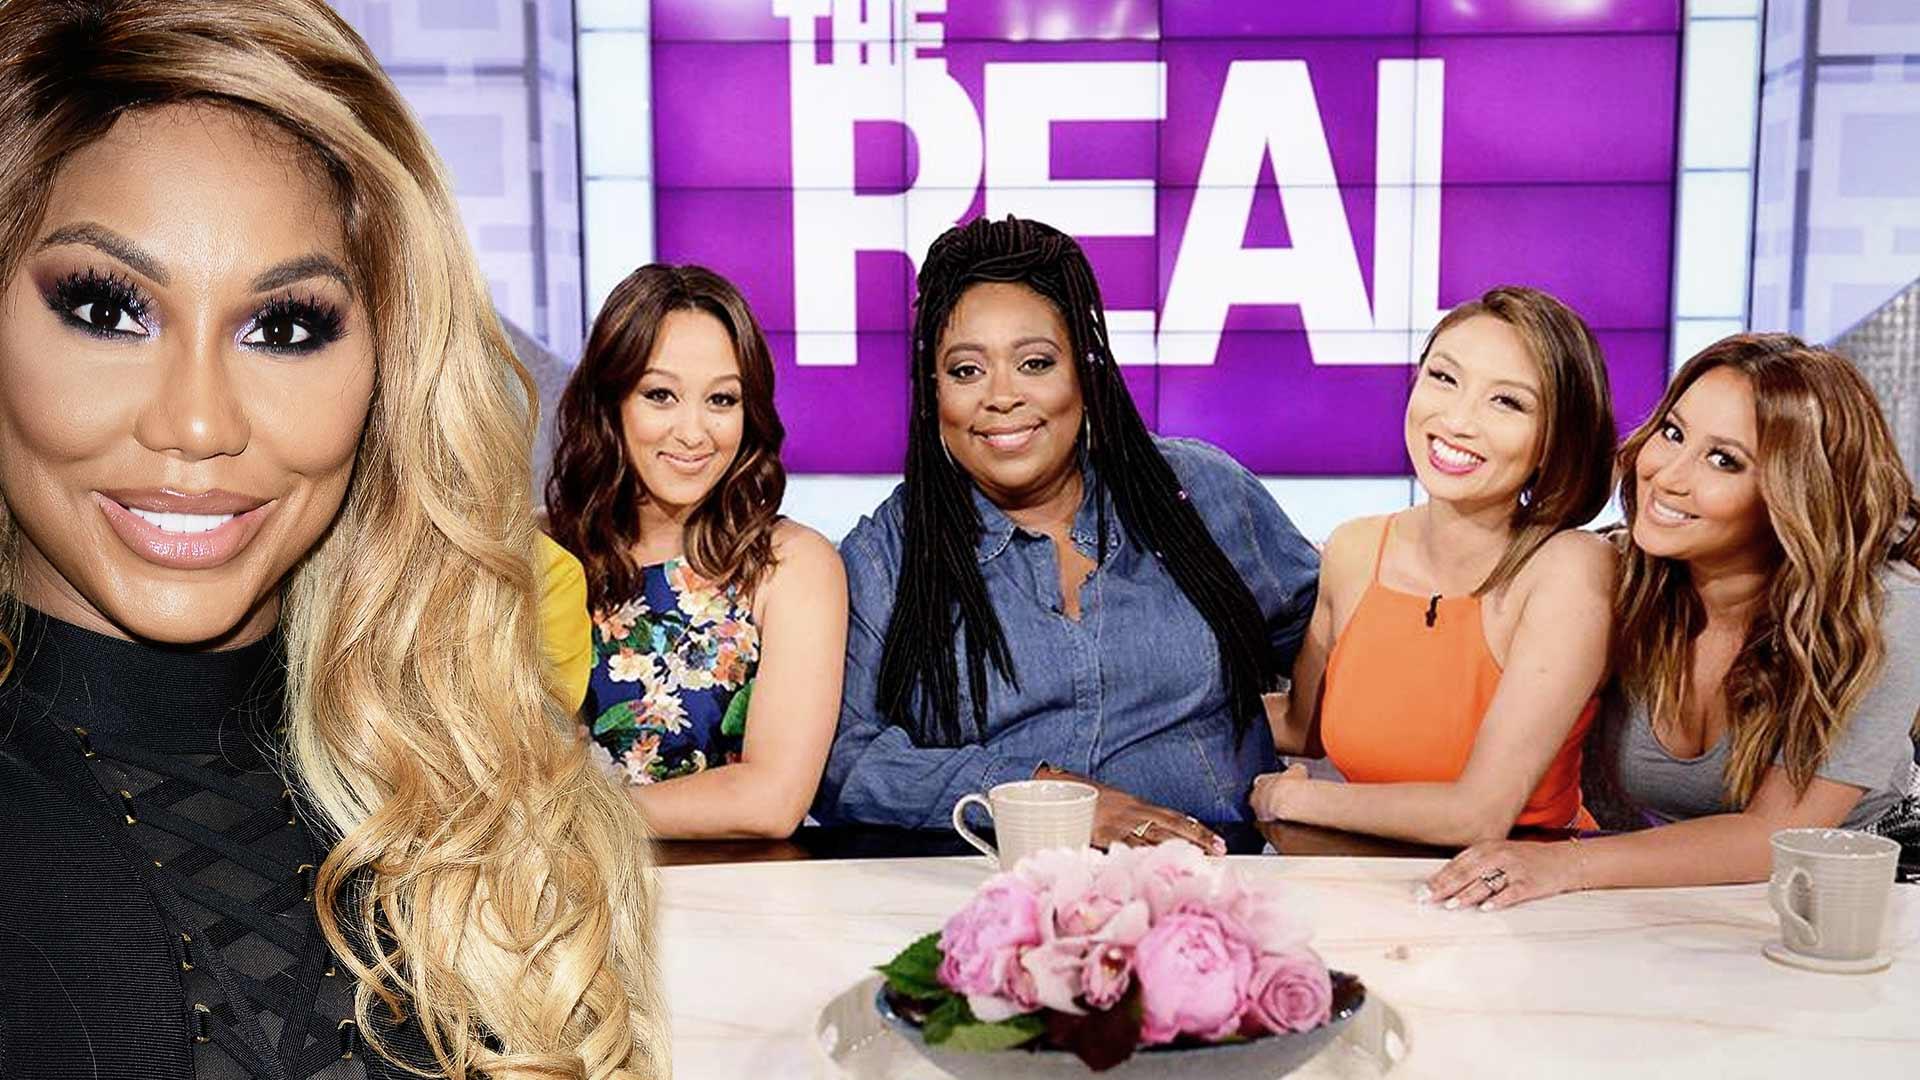 Tamar Braxton Apologizes to Former ‘The Real’ Co-Hosts Years After Nasty Show Exit